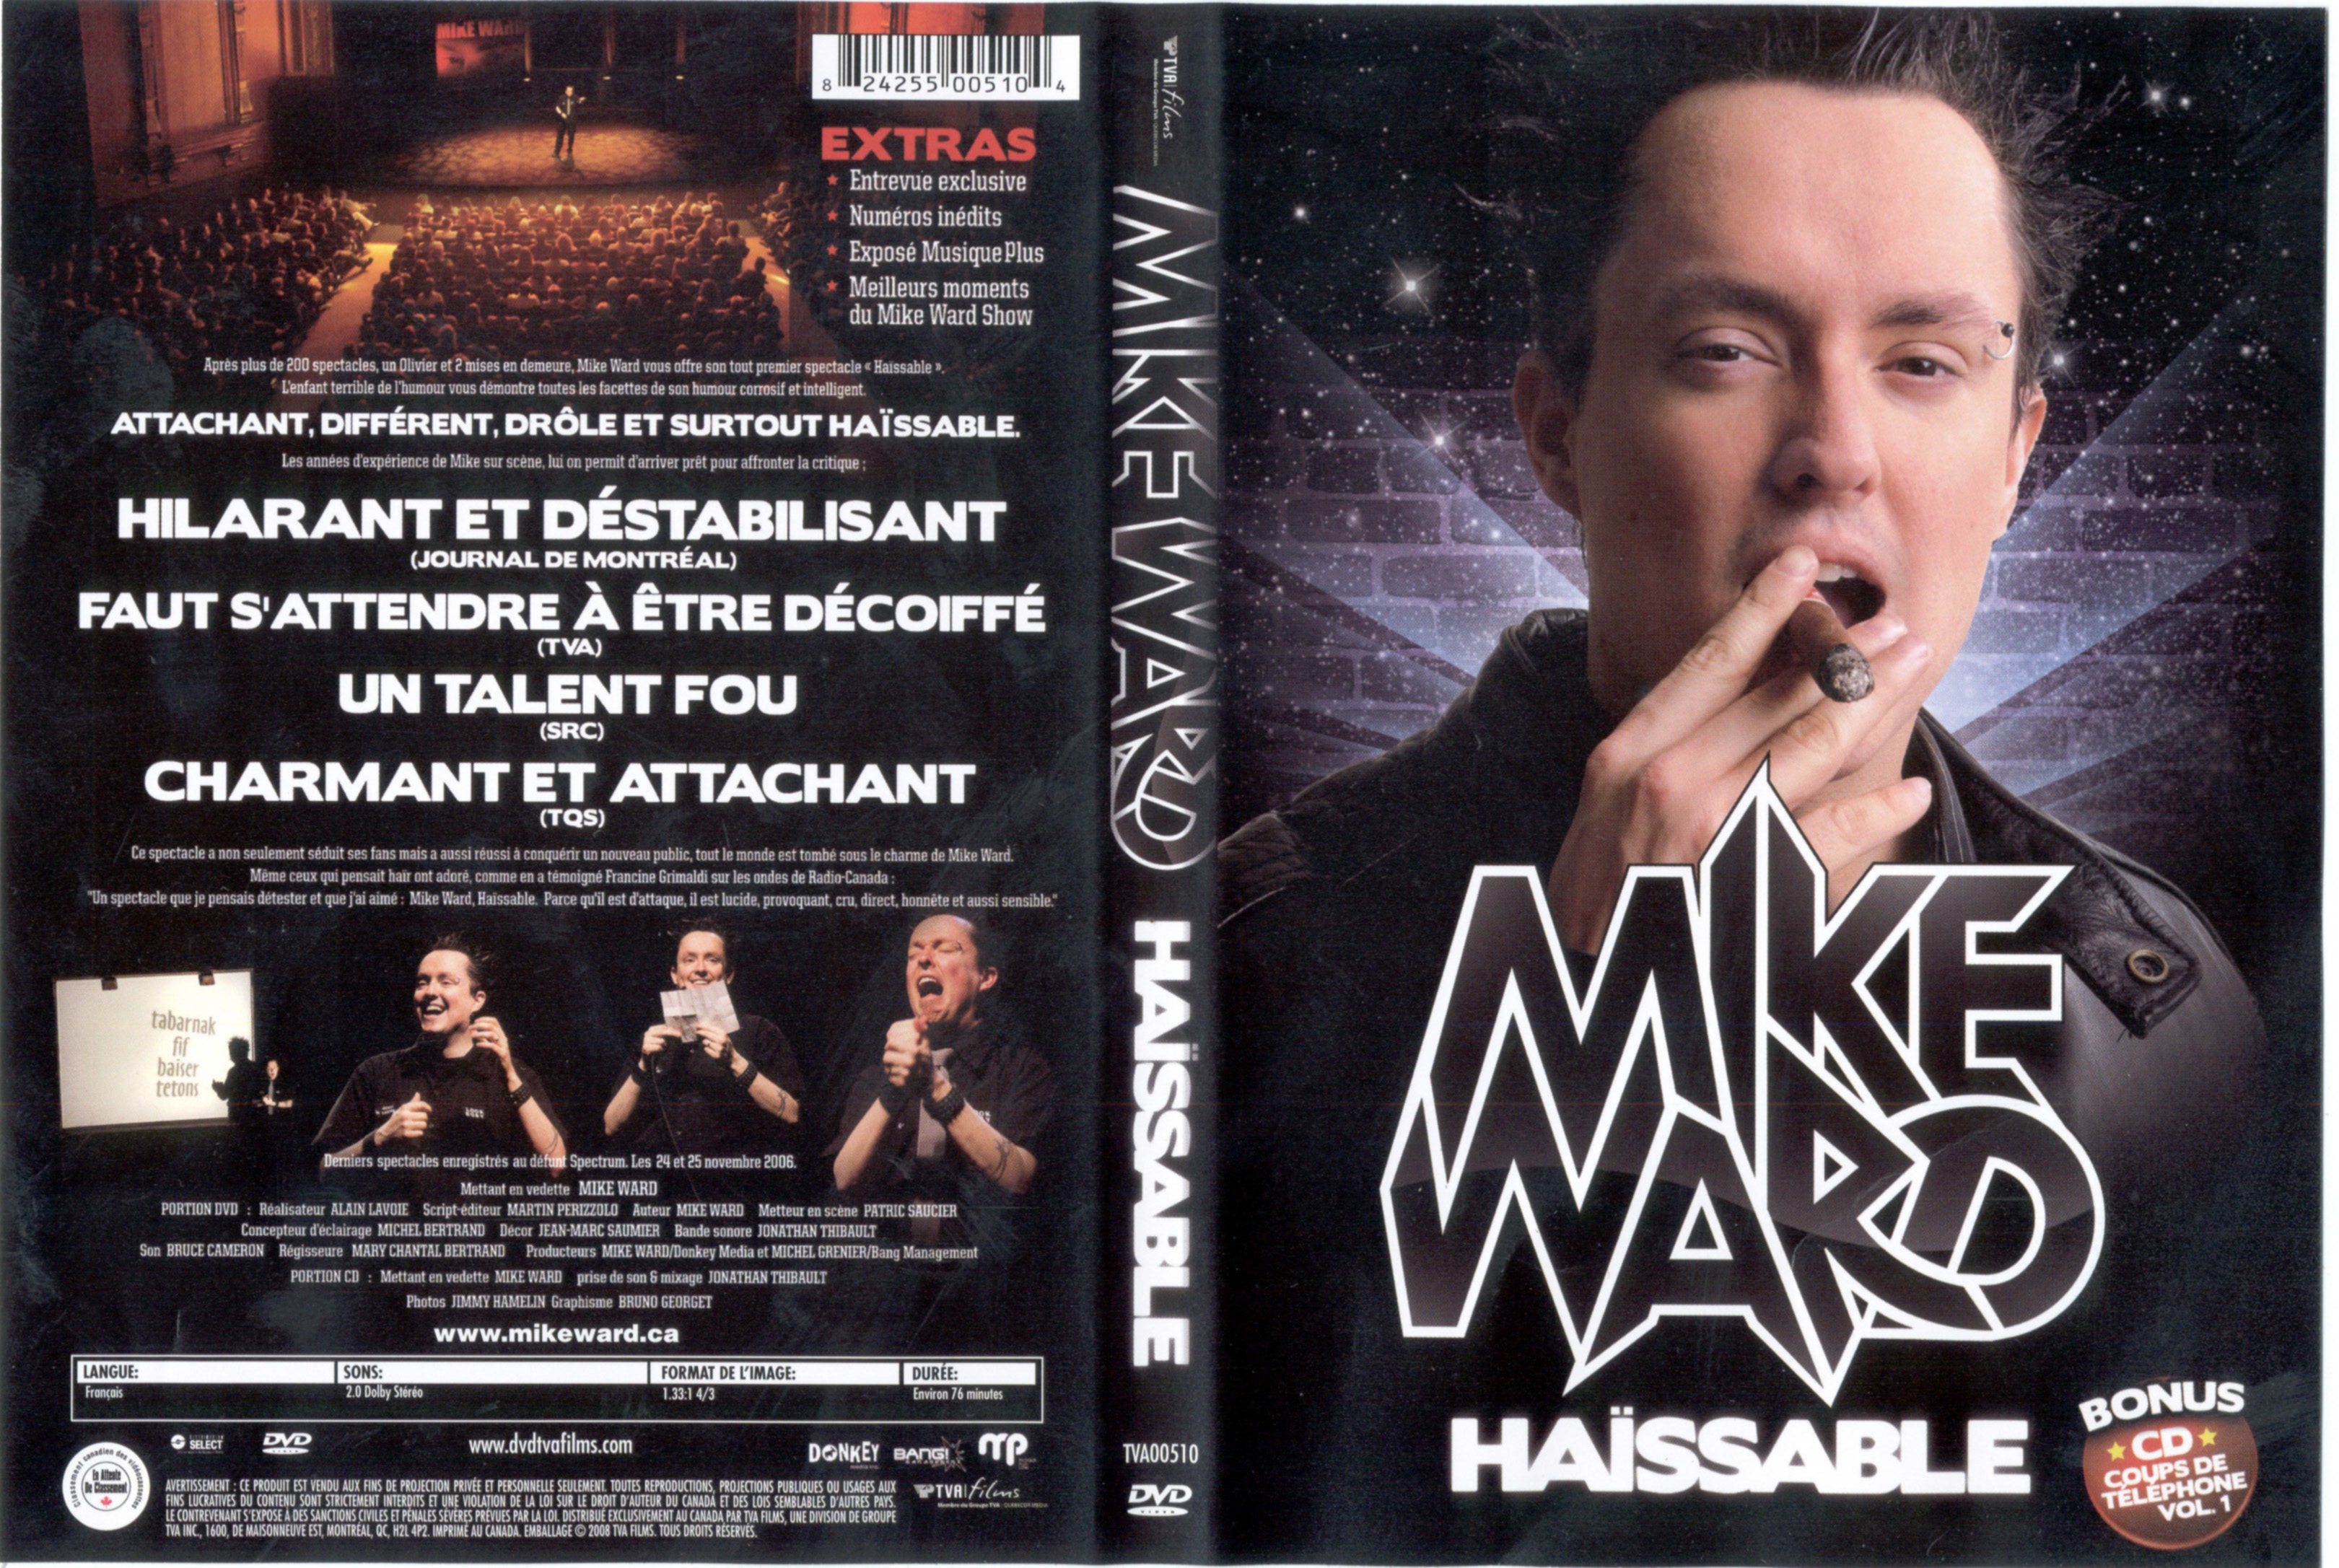 Jaquette DVD Mike Ward - Haissable